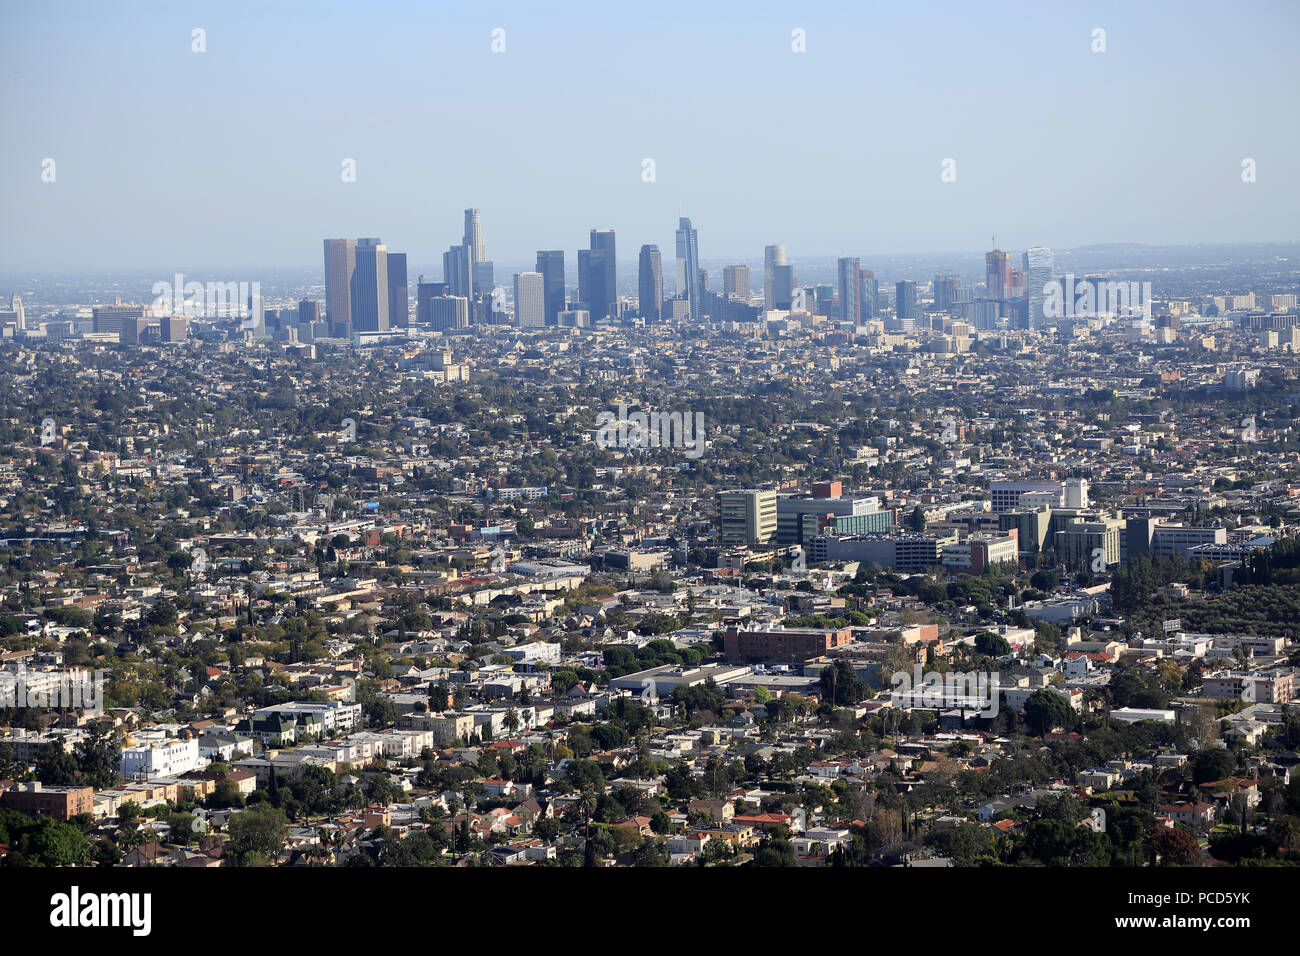 View of Downtown skyline from Hollywood Hills, Los Angeles, California, United States of America, North America Stock Photo